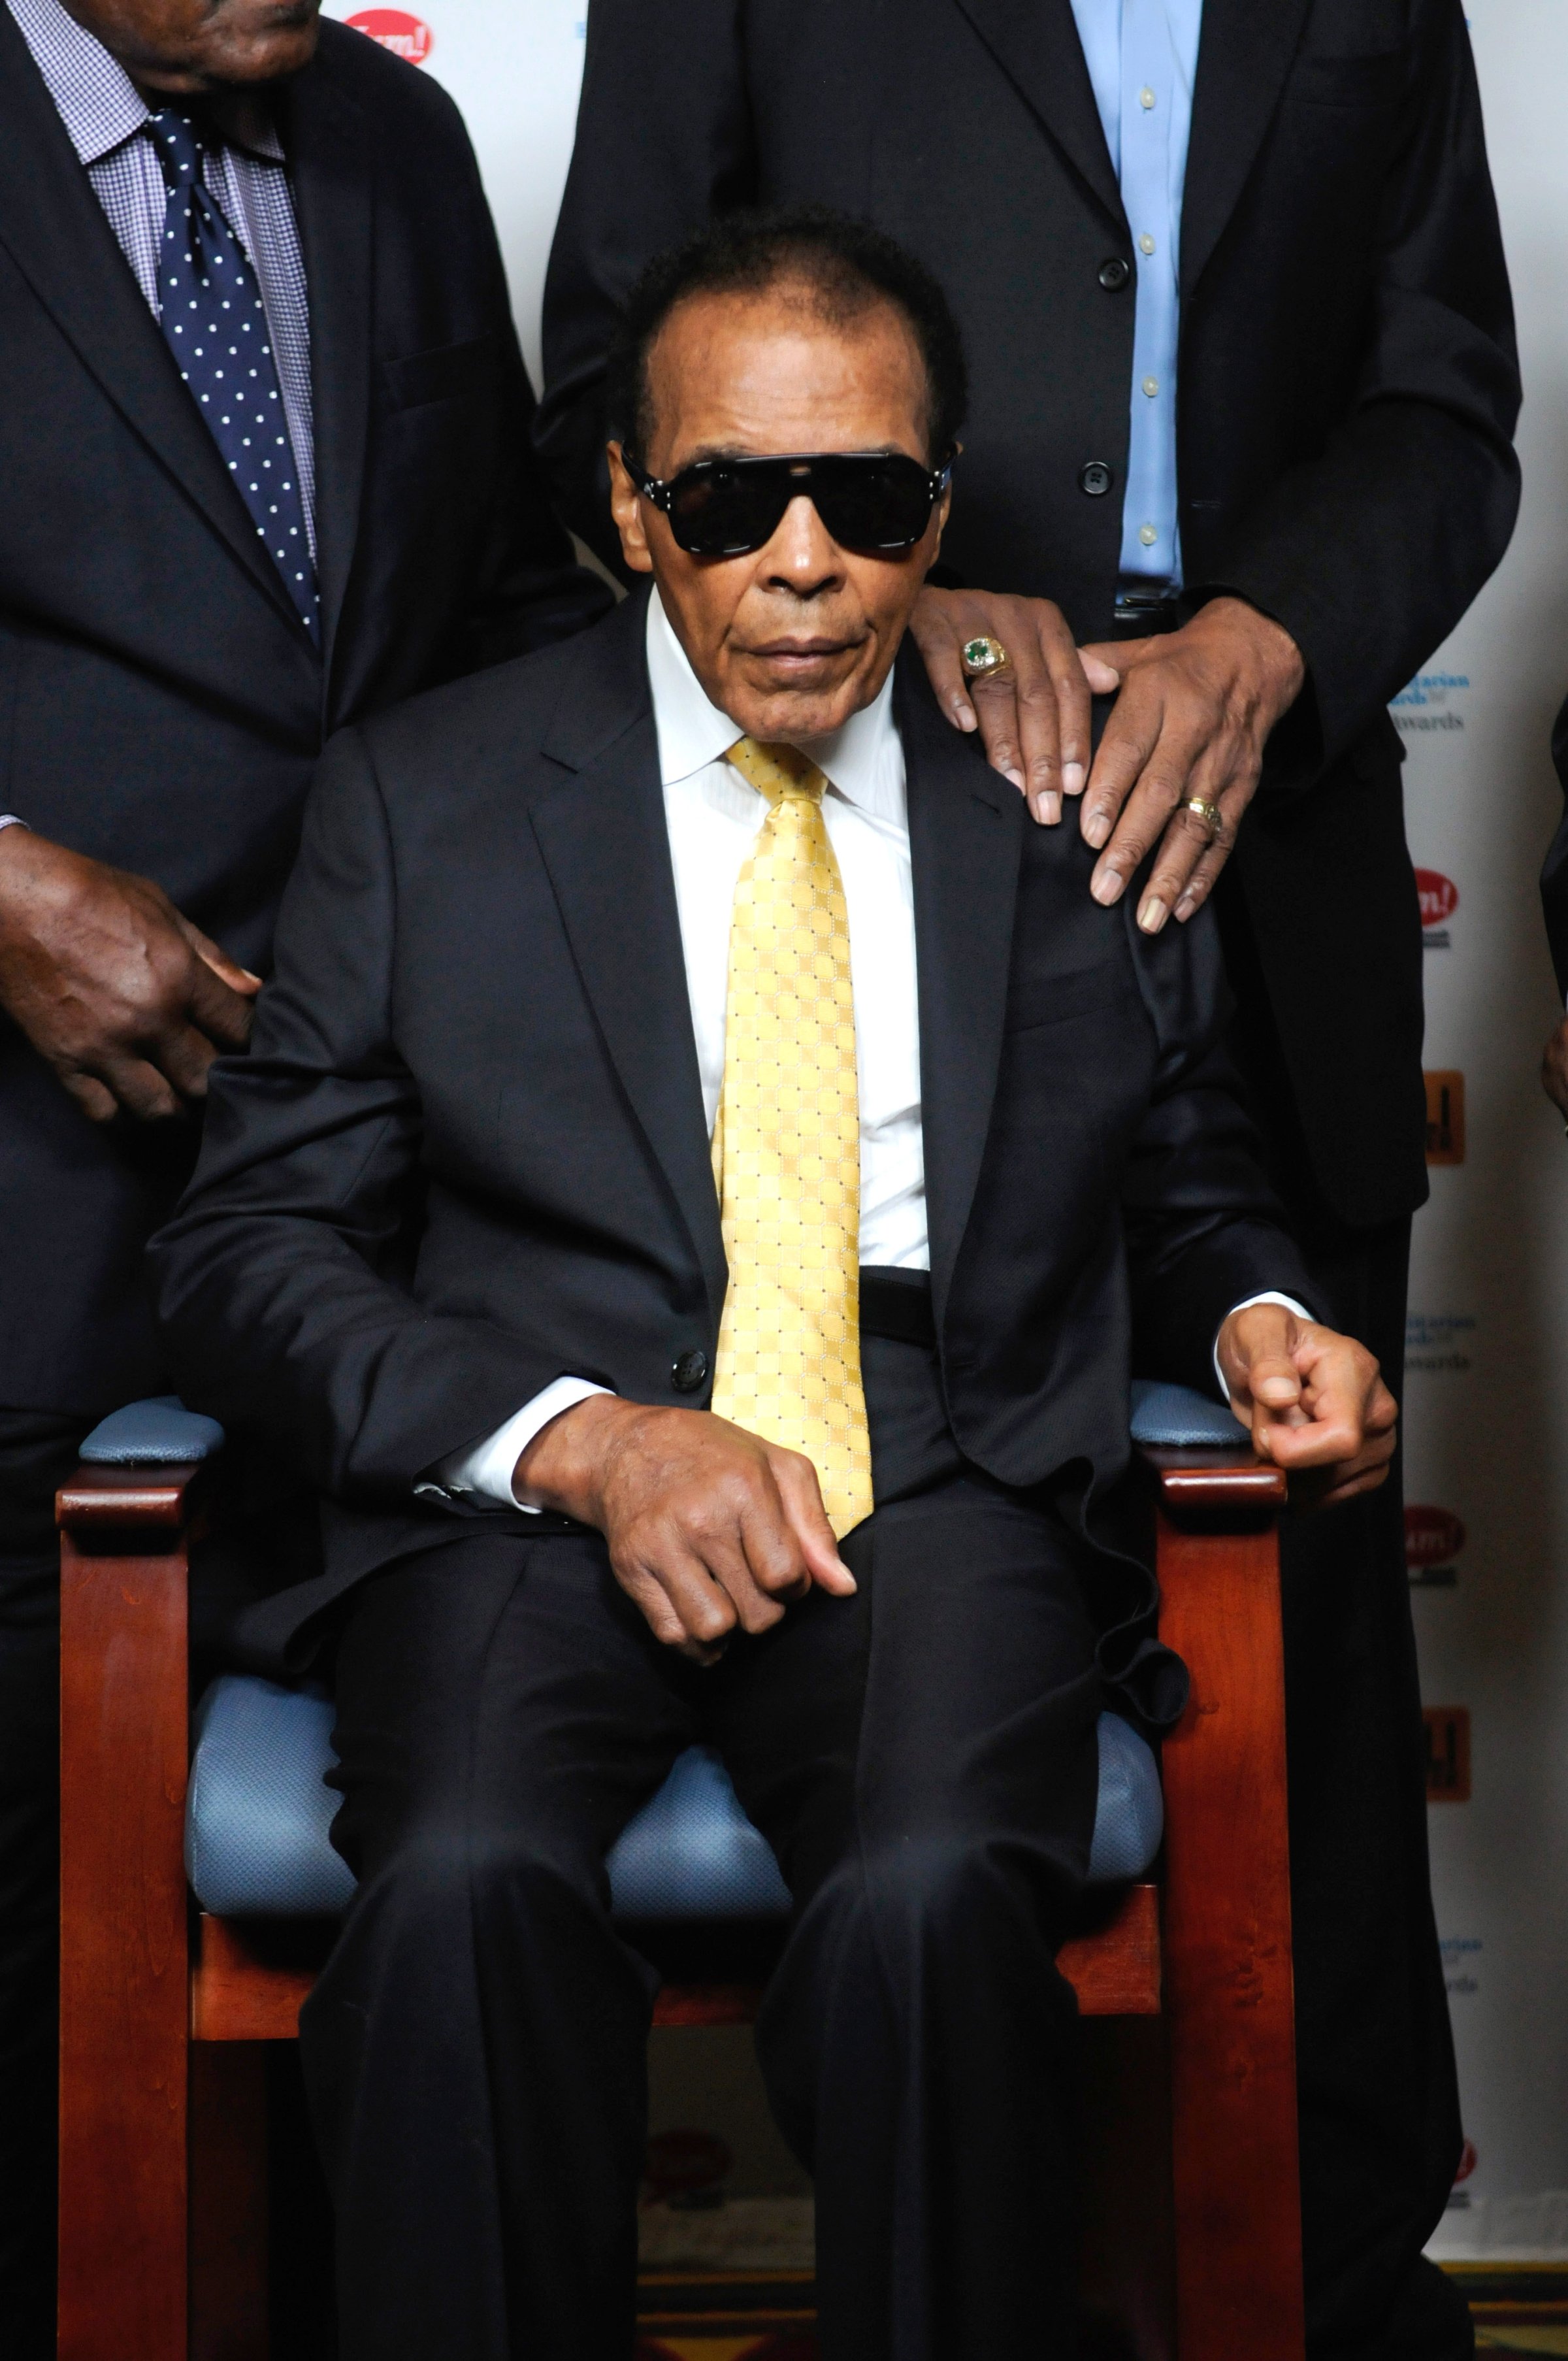 Muhammad Ali attends the 2014 Muhammad Ali Humanitarian Awards at the Louisville Marriott Downtown on Sept. 27, 2014 in Louisville.